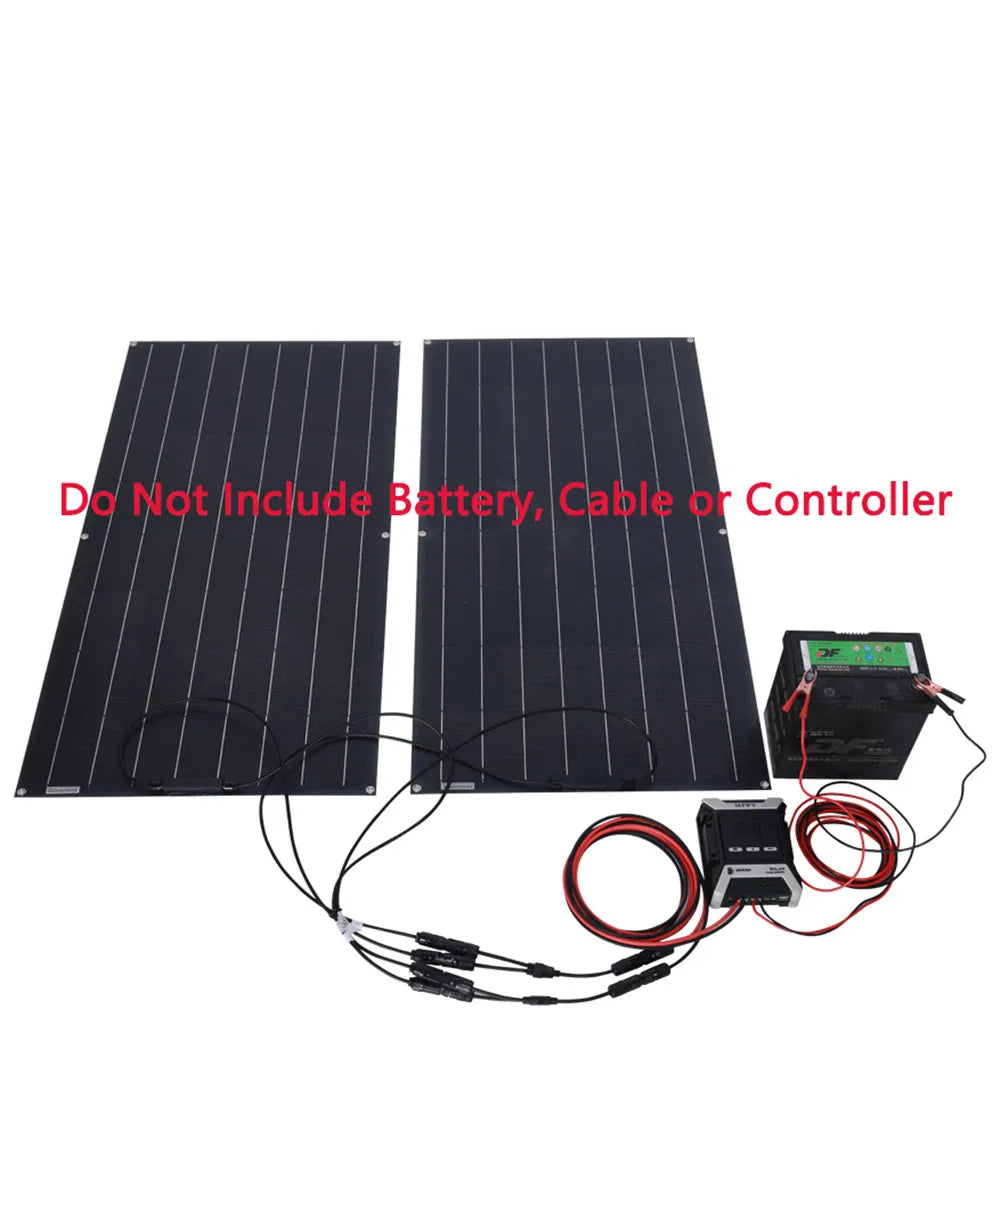 400W 300W 200W 100W Etfe Flexible Solar Panel, Kit includes battery charger with controller.